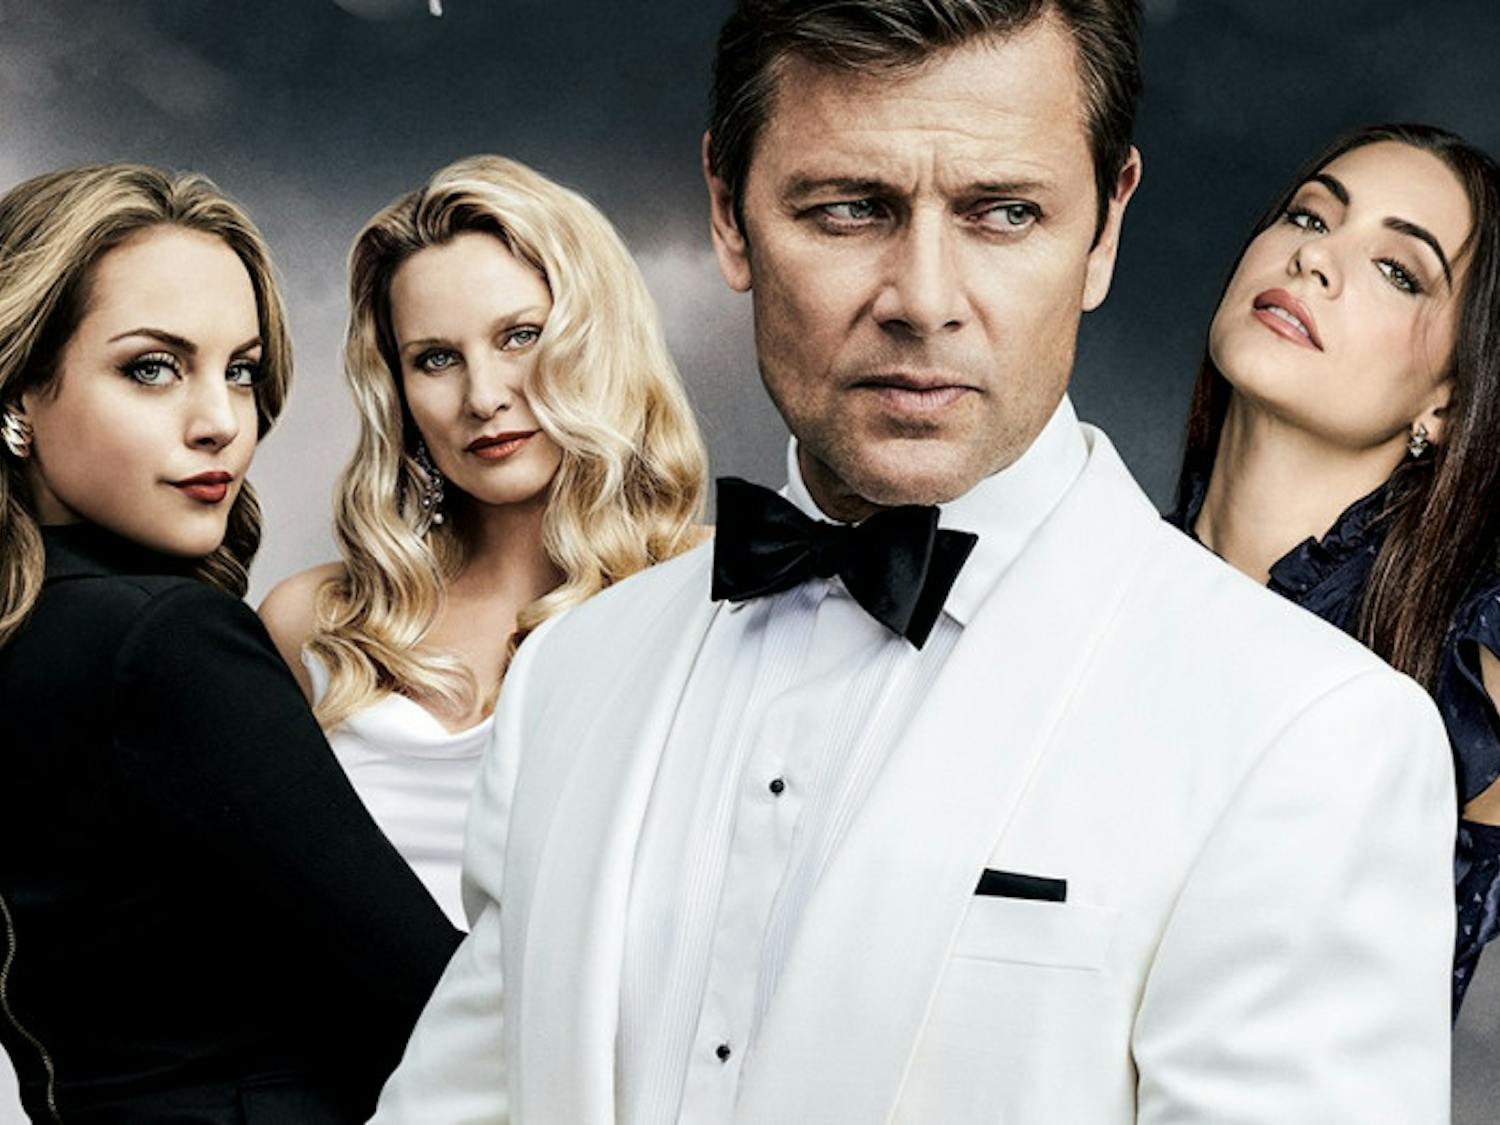 ”Dynasty” was renewed for a third season on Jan. 31. The high-brow drama is a reboot of the popular 80’s soap opera.